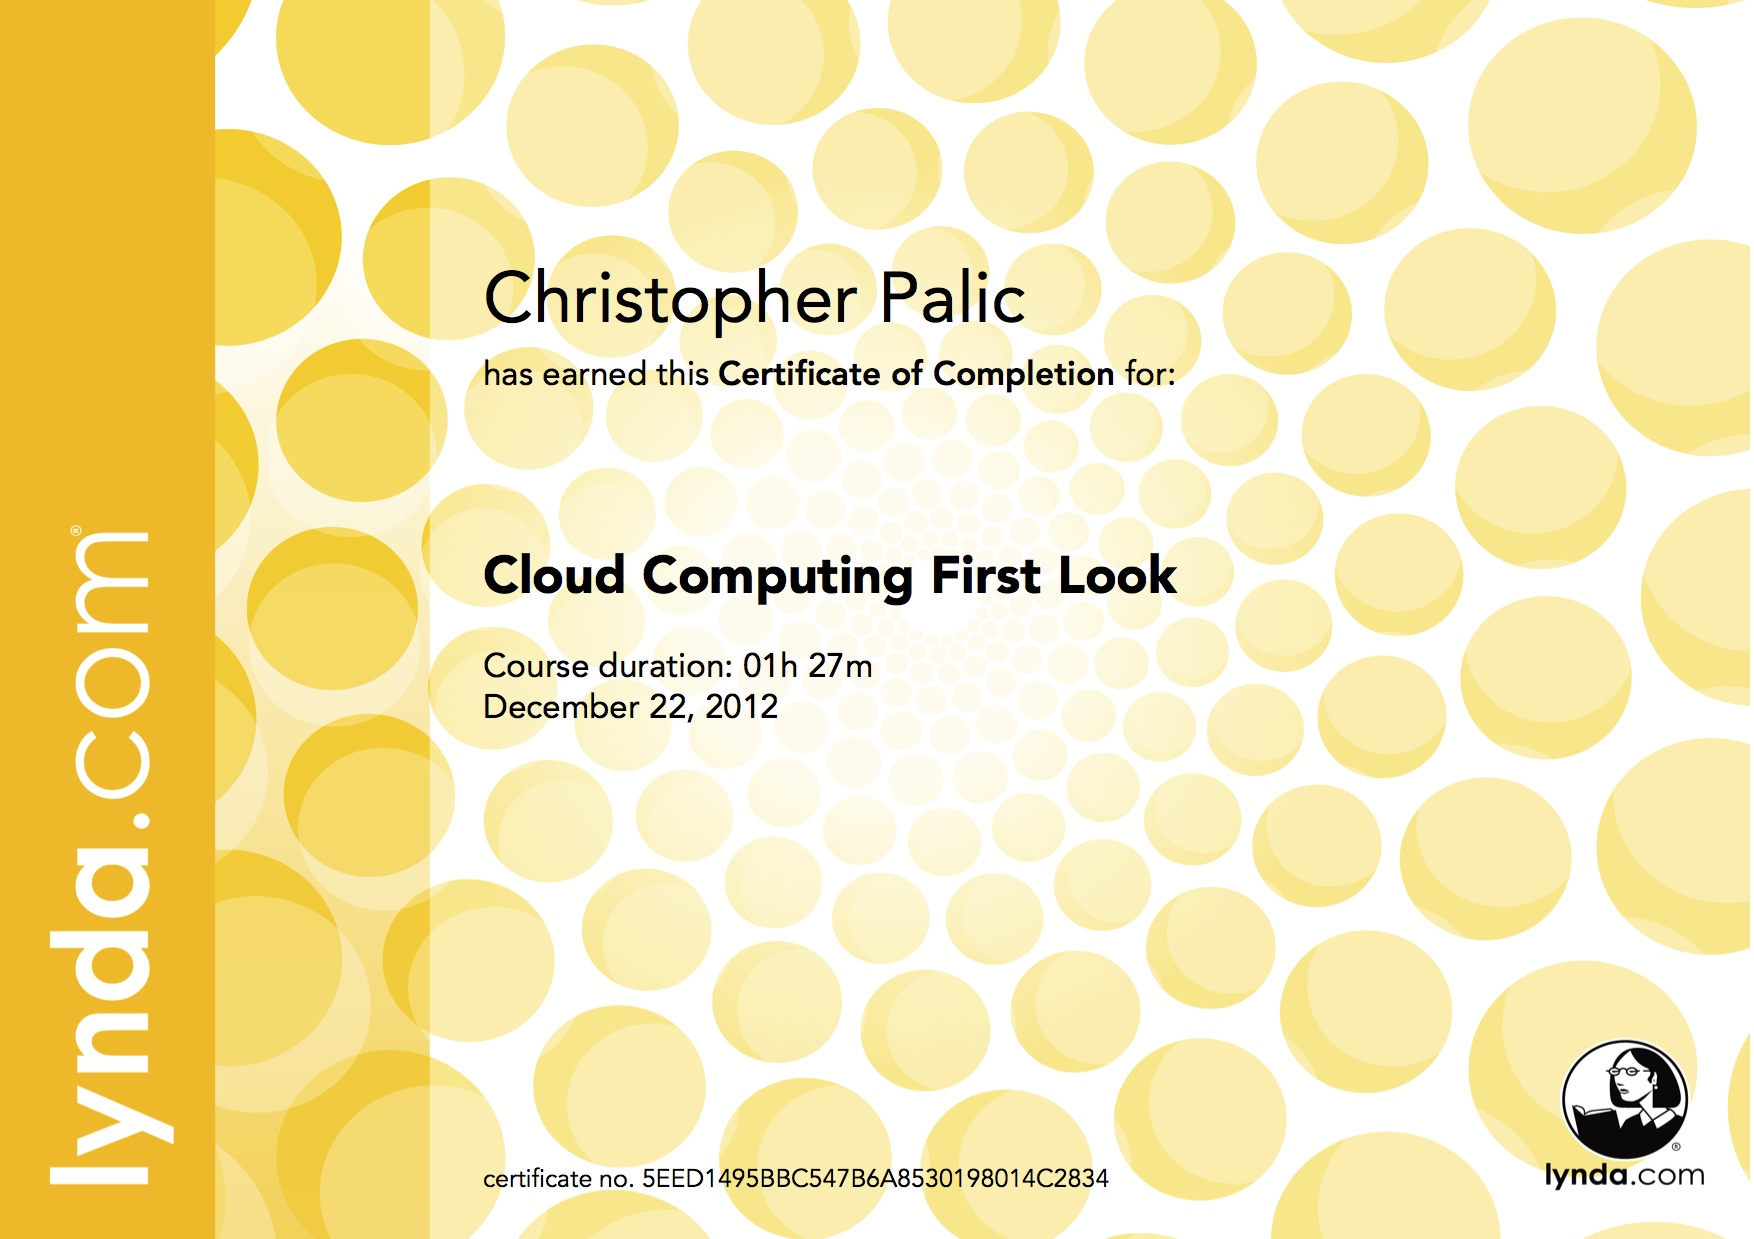 Cloud Computing First Look - Certificate Of Completion